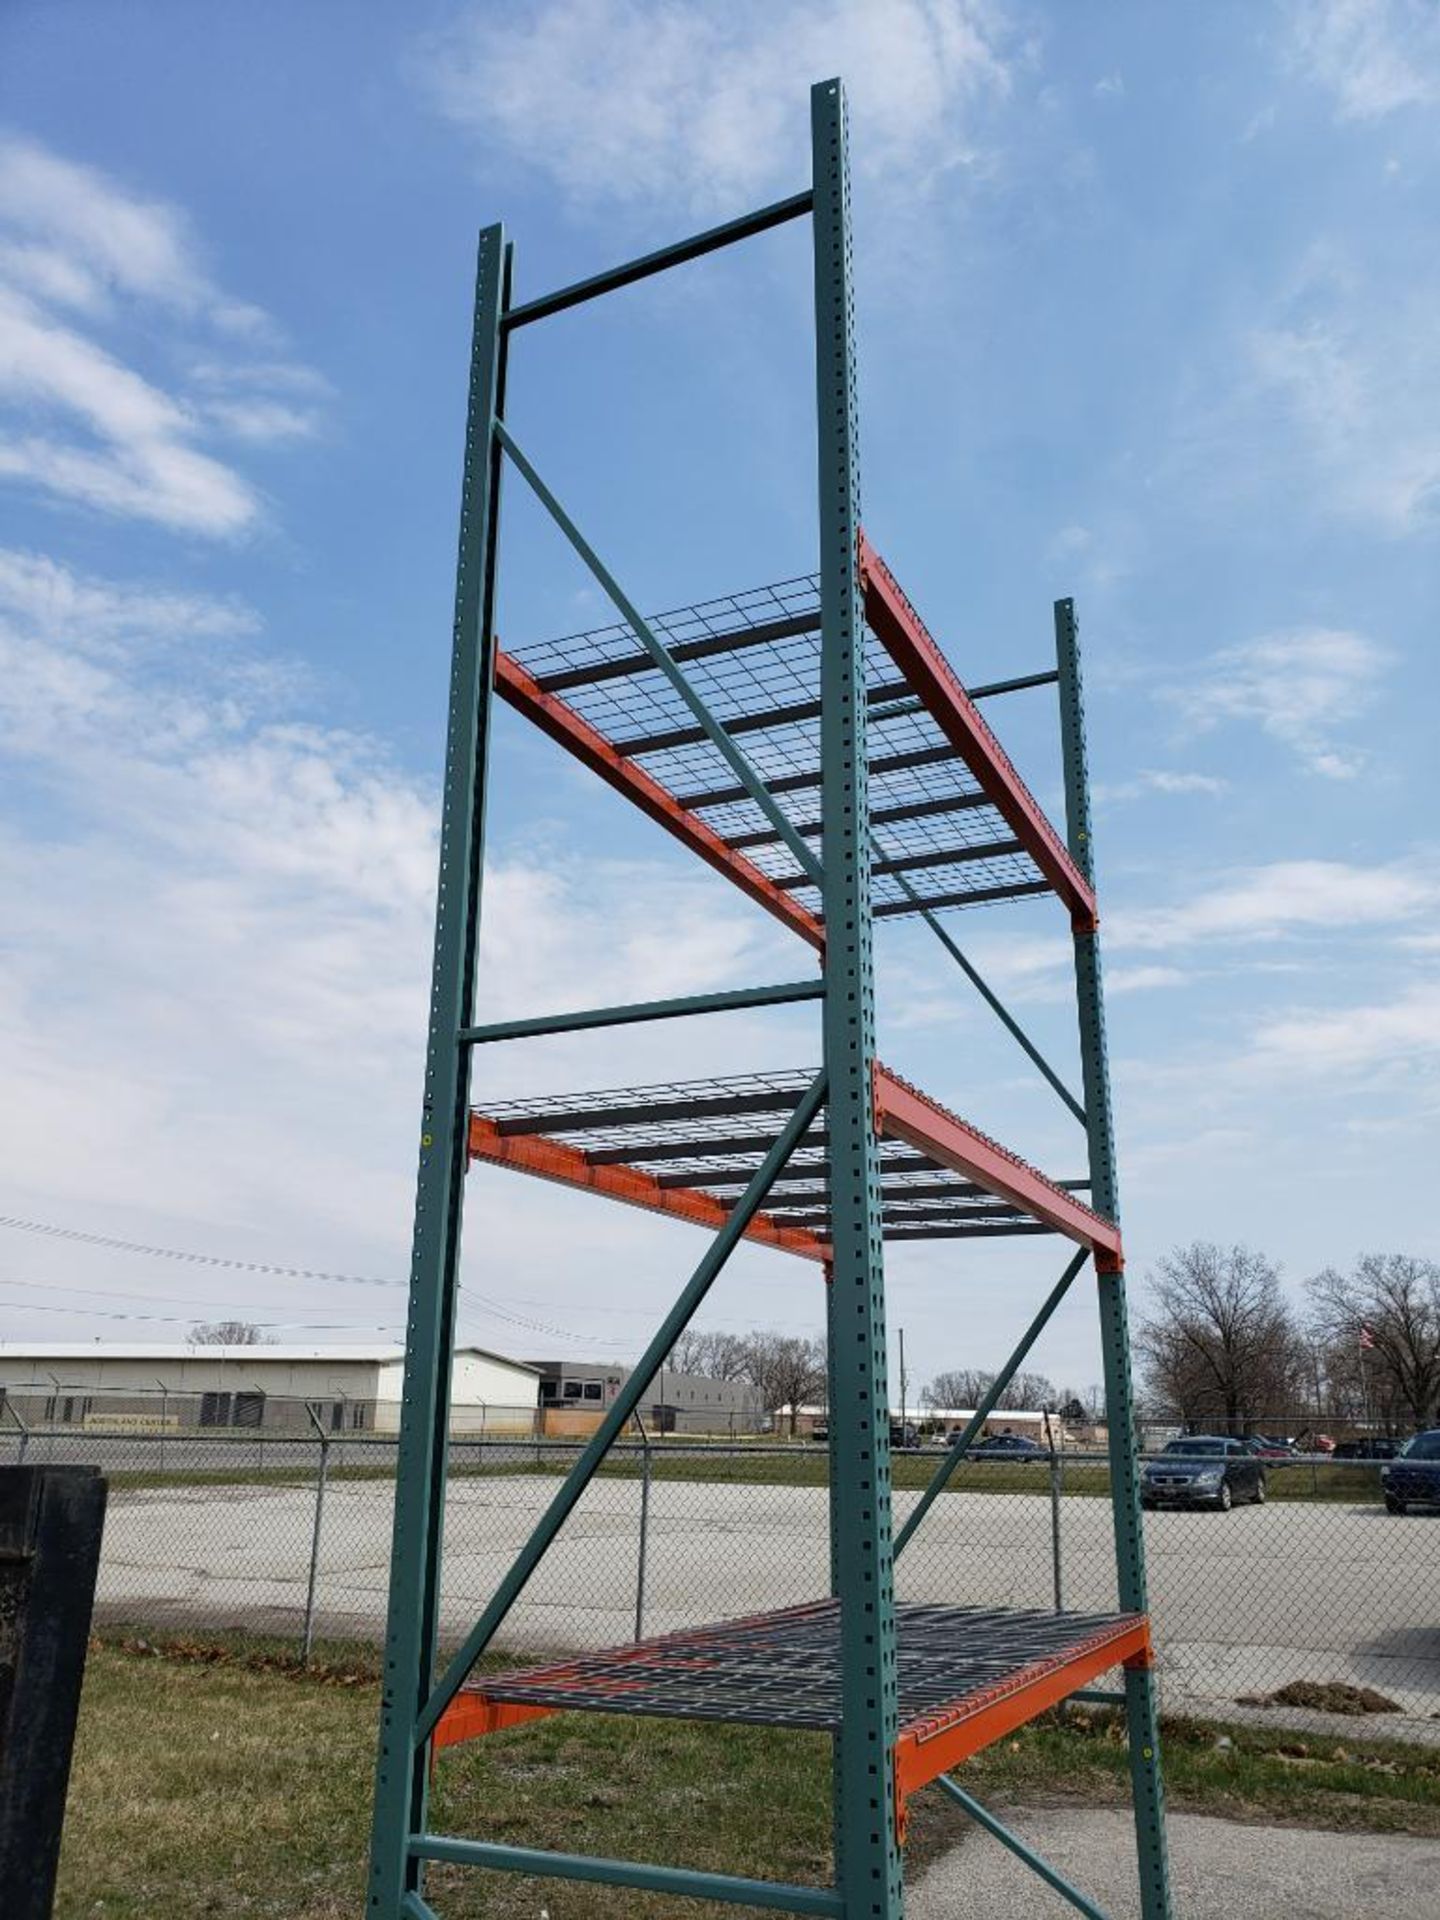 Qty 5 - NEW 16ft x 42in Teardrop Pallet Rack Upright, 3" x 3" Column, Green, 23,900# Capacity at 48" - Image 11 of 11